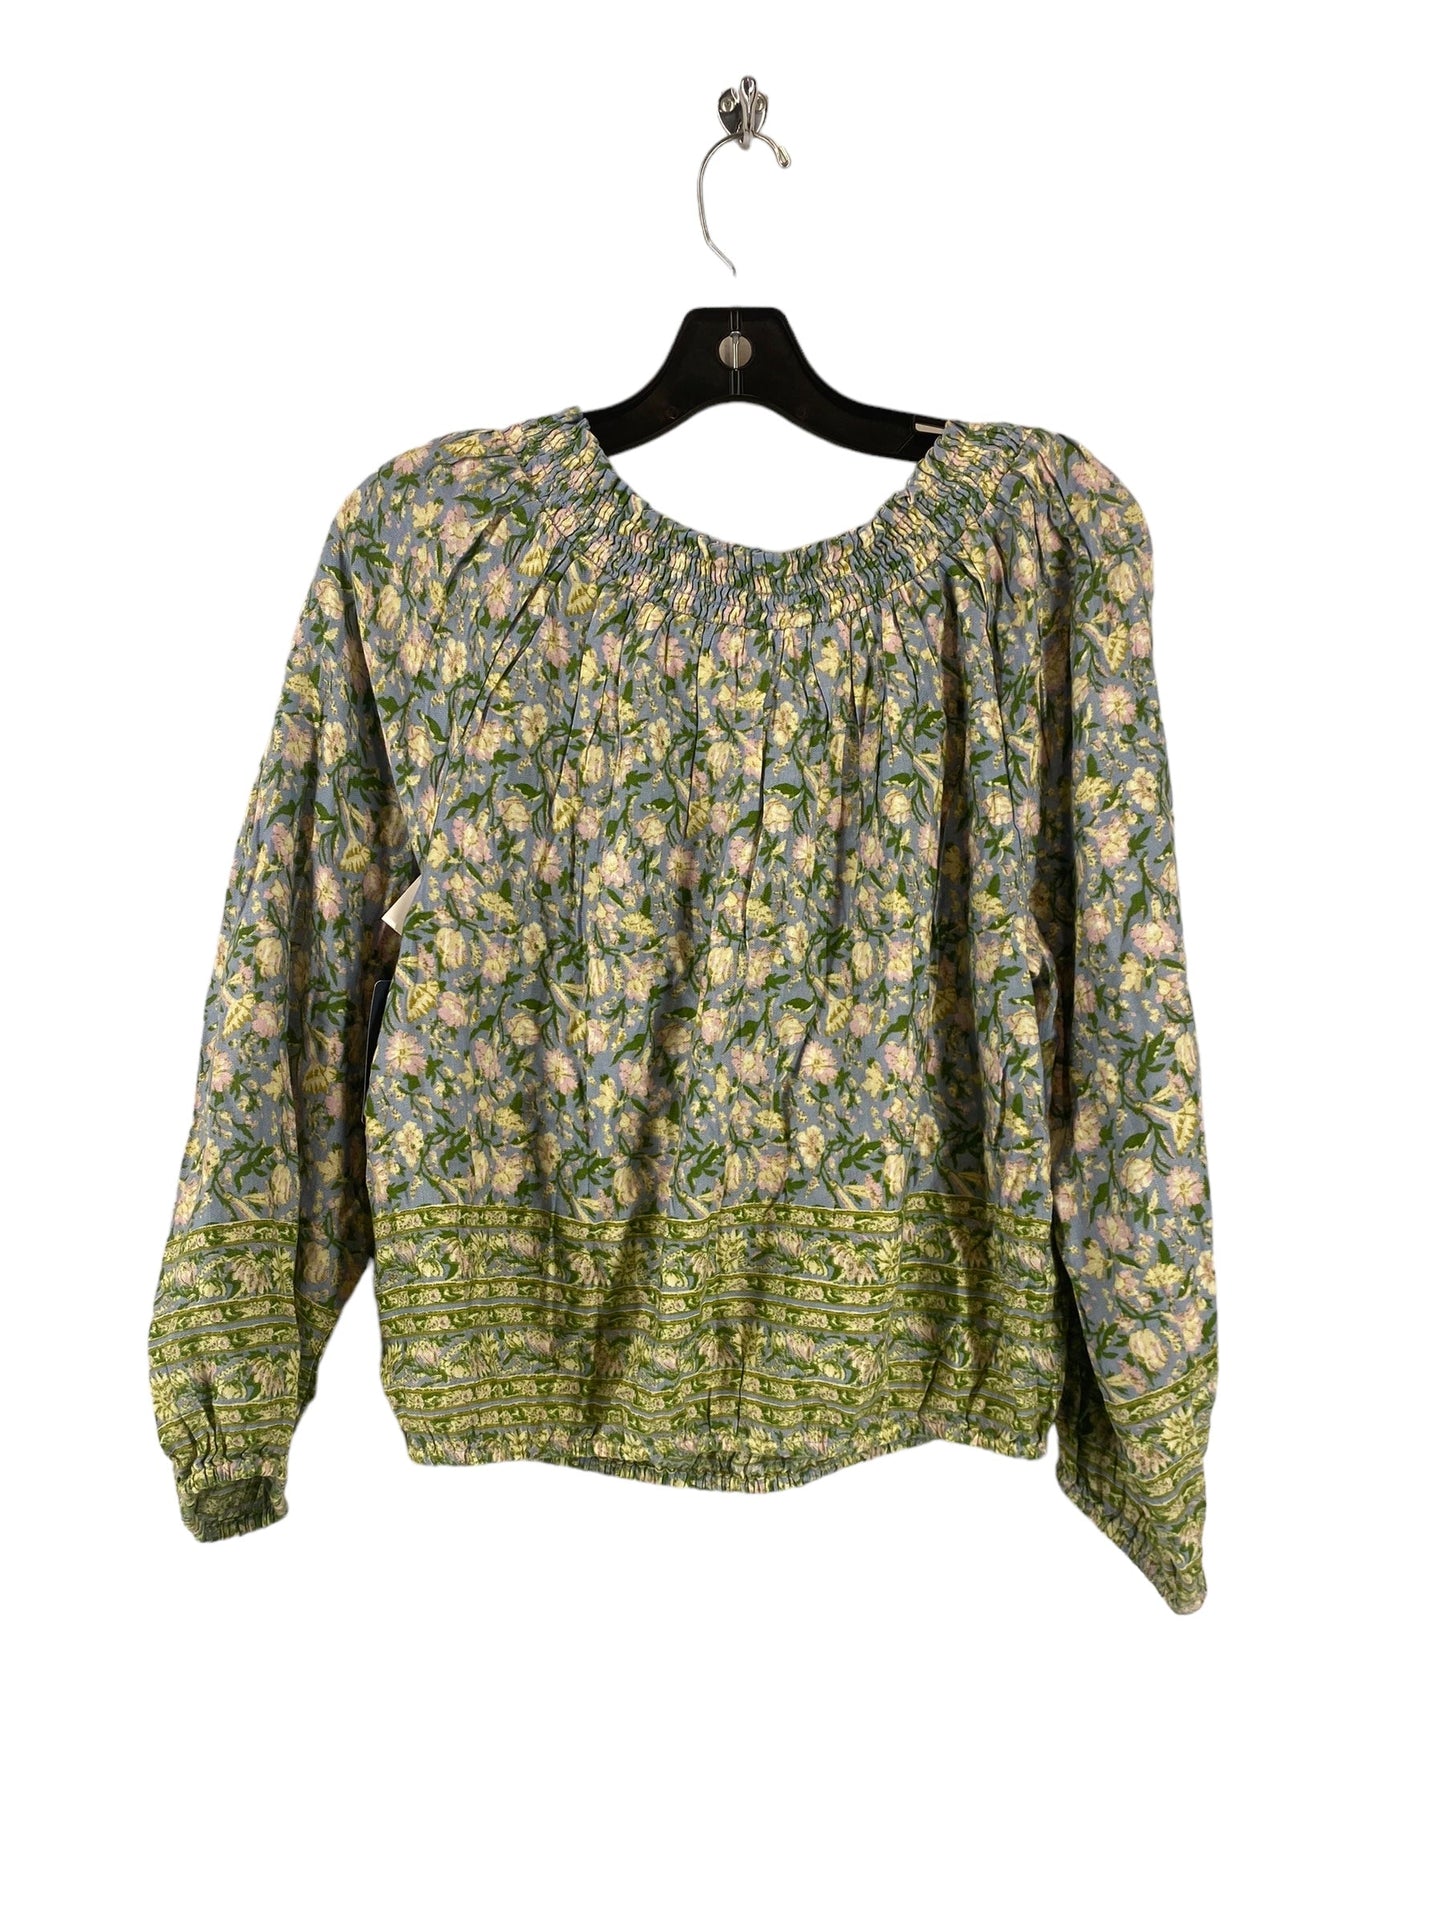 Floral Print Top 3/4 Sleeve Lucky Brand, Size S